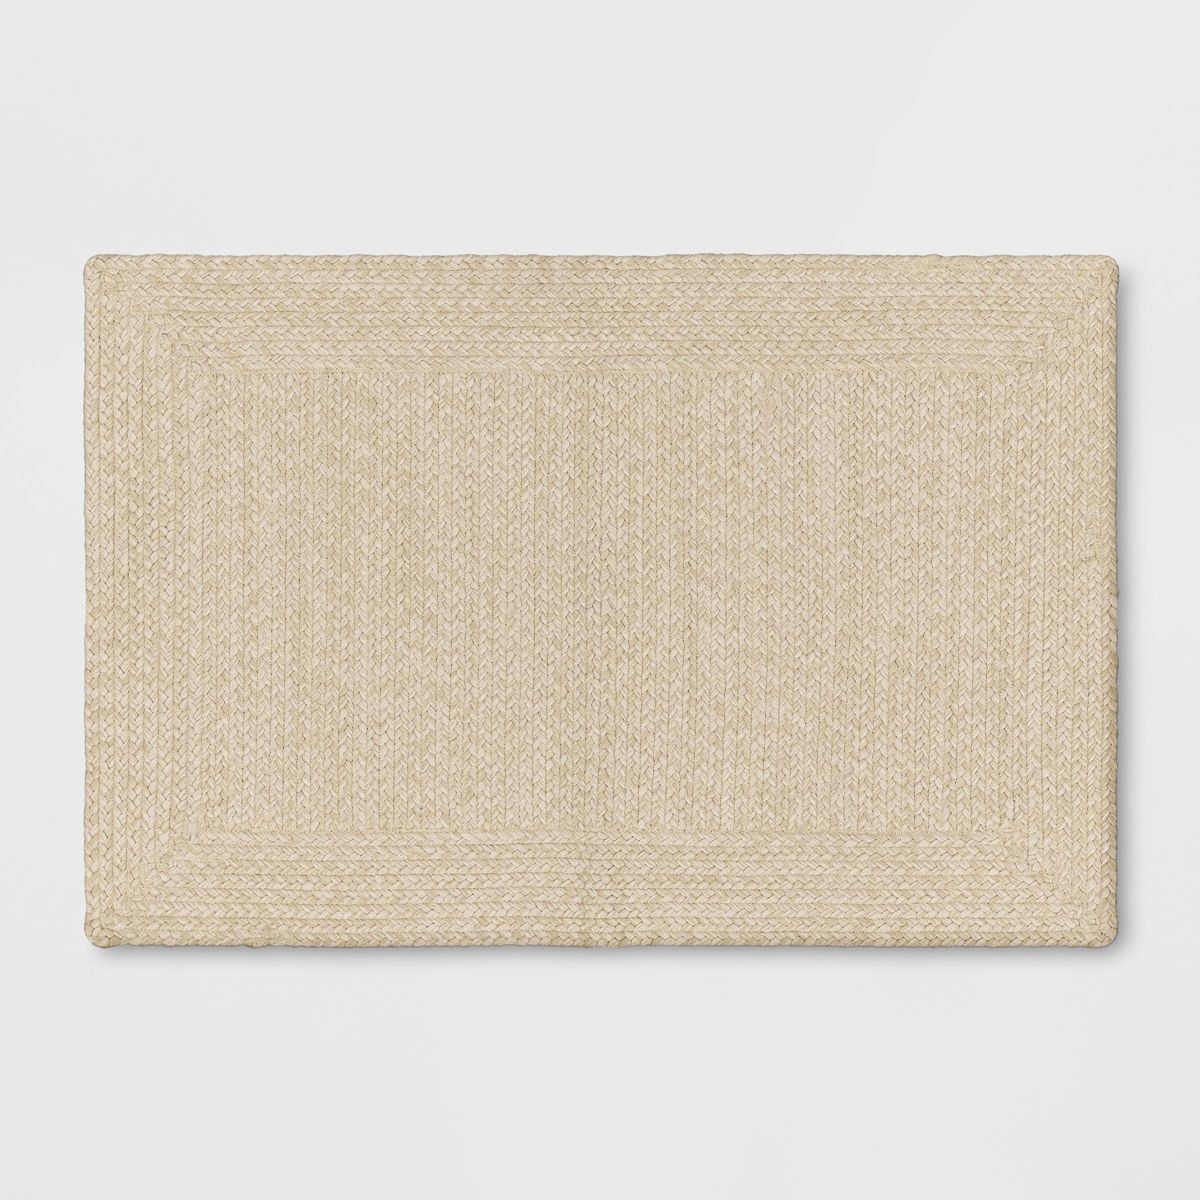 2'x3' Natural Woven Rectangular Braided Outdoor Accent Rug Heathered Cream - Threshold™ | Target